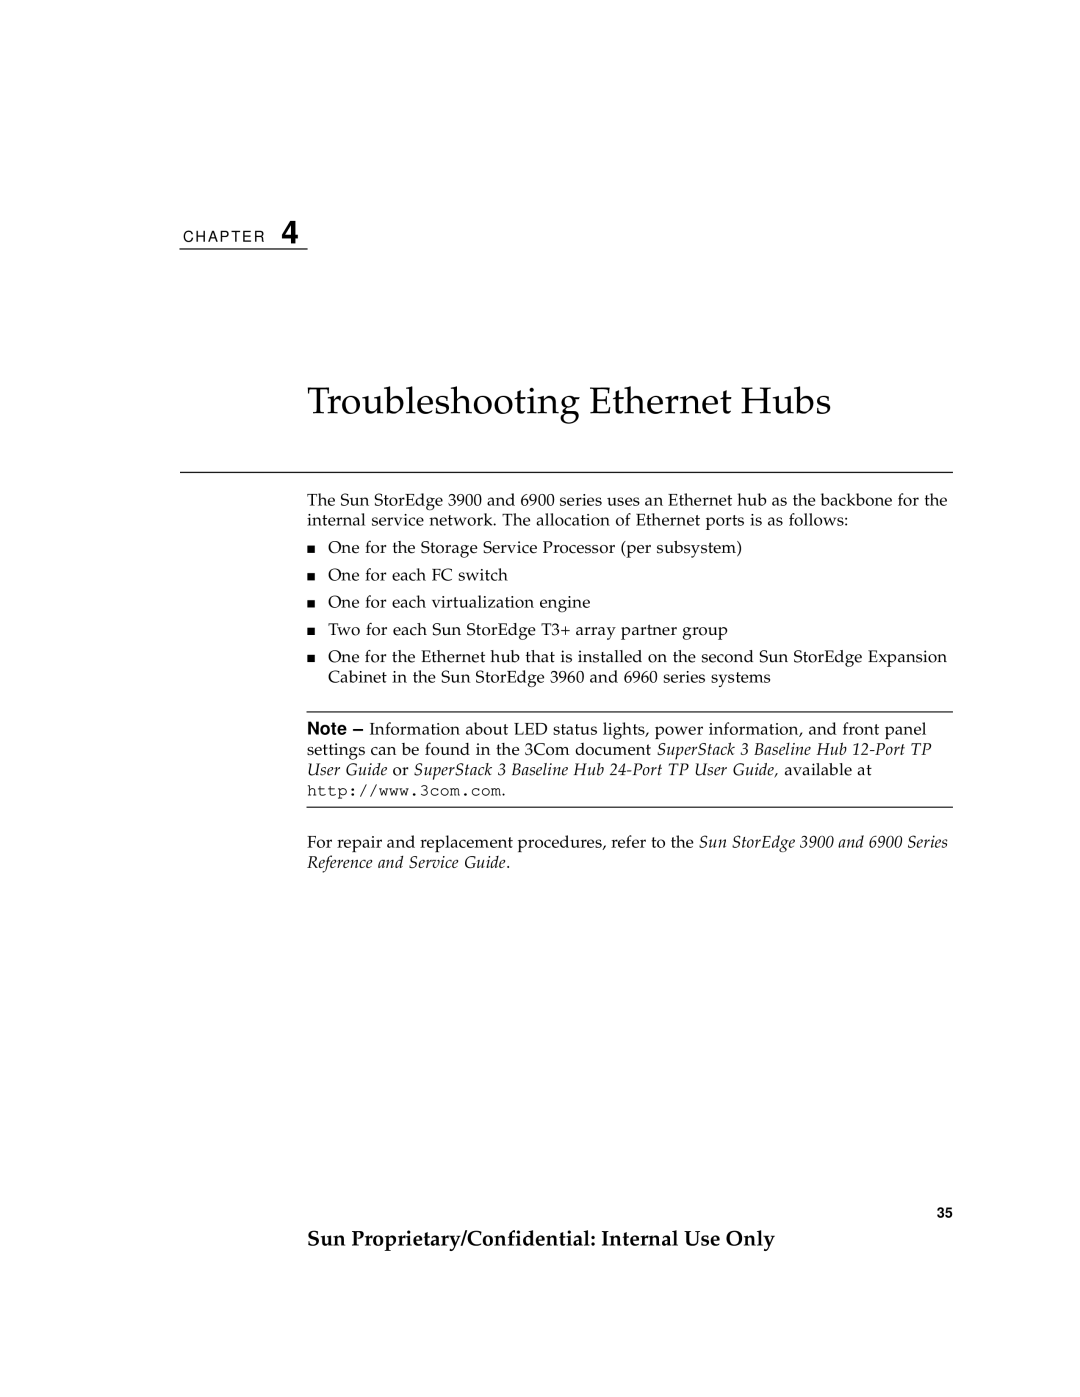 Sun Microsystems 6900, 3900 manual Troubleshooting Ethernet Hubs, Sun Proprietary/Confidential Internal Use Only 